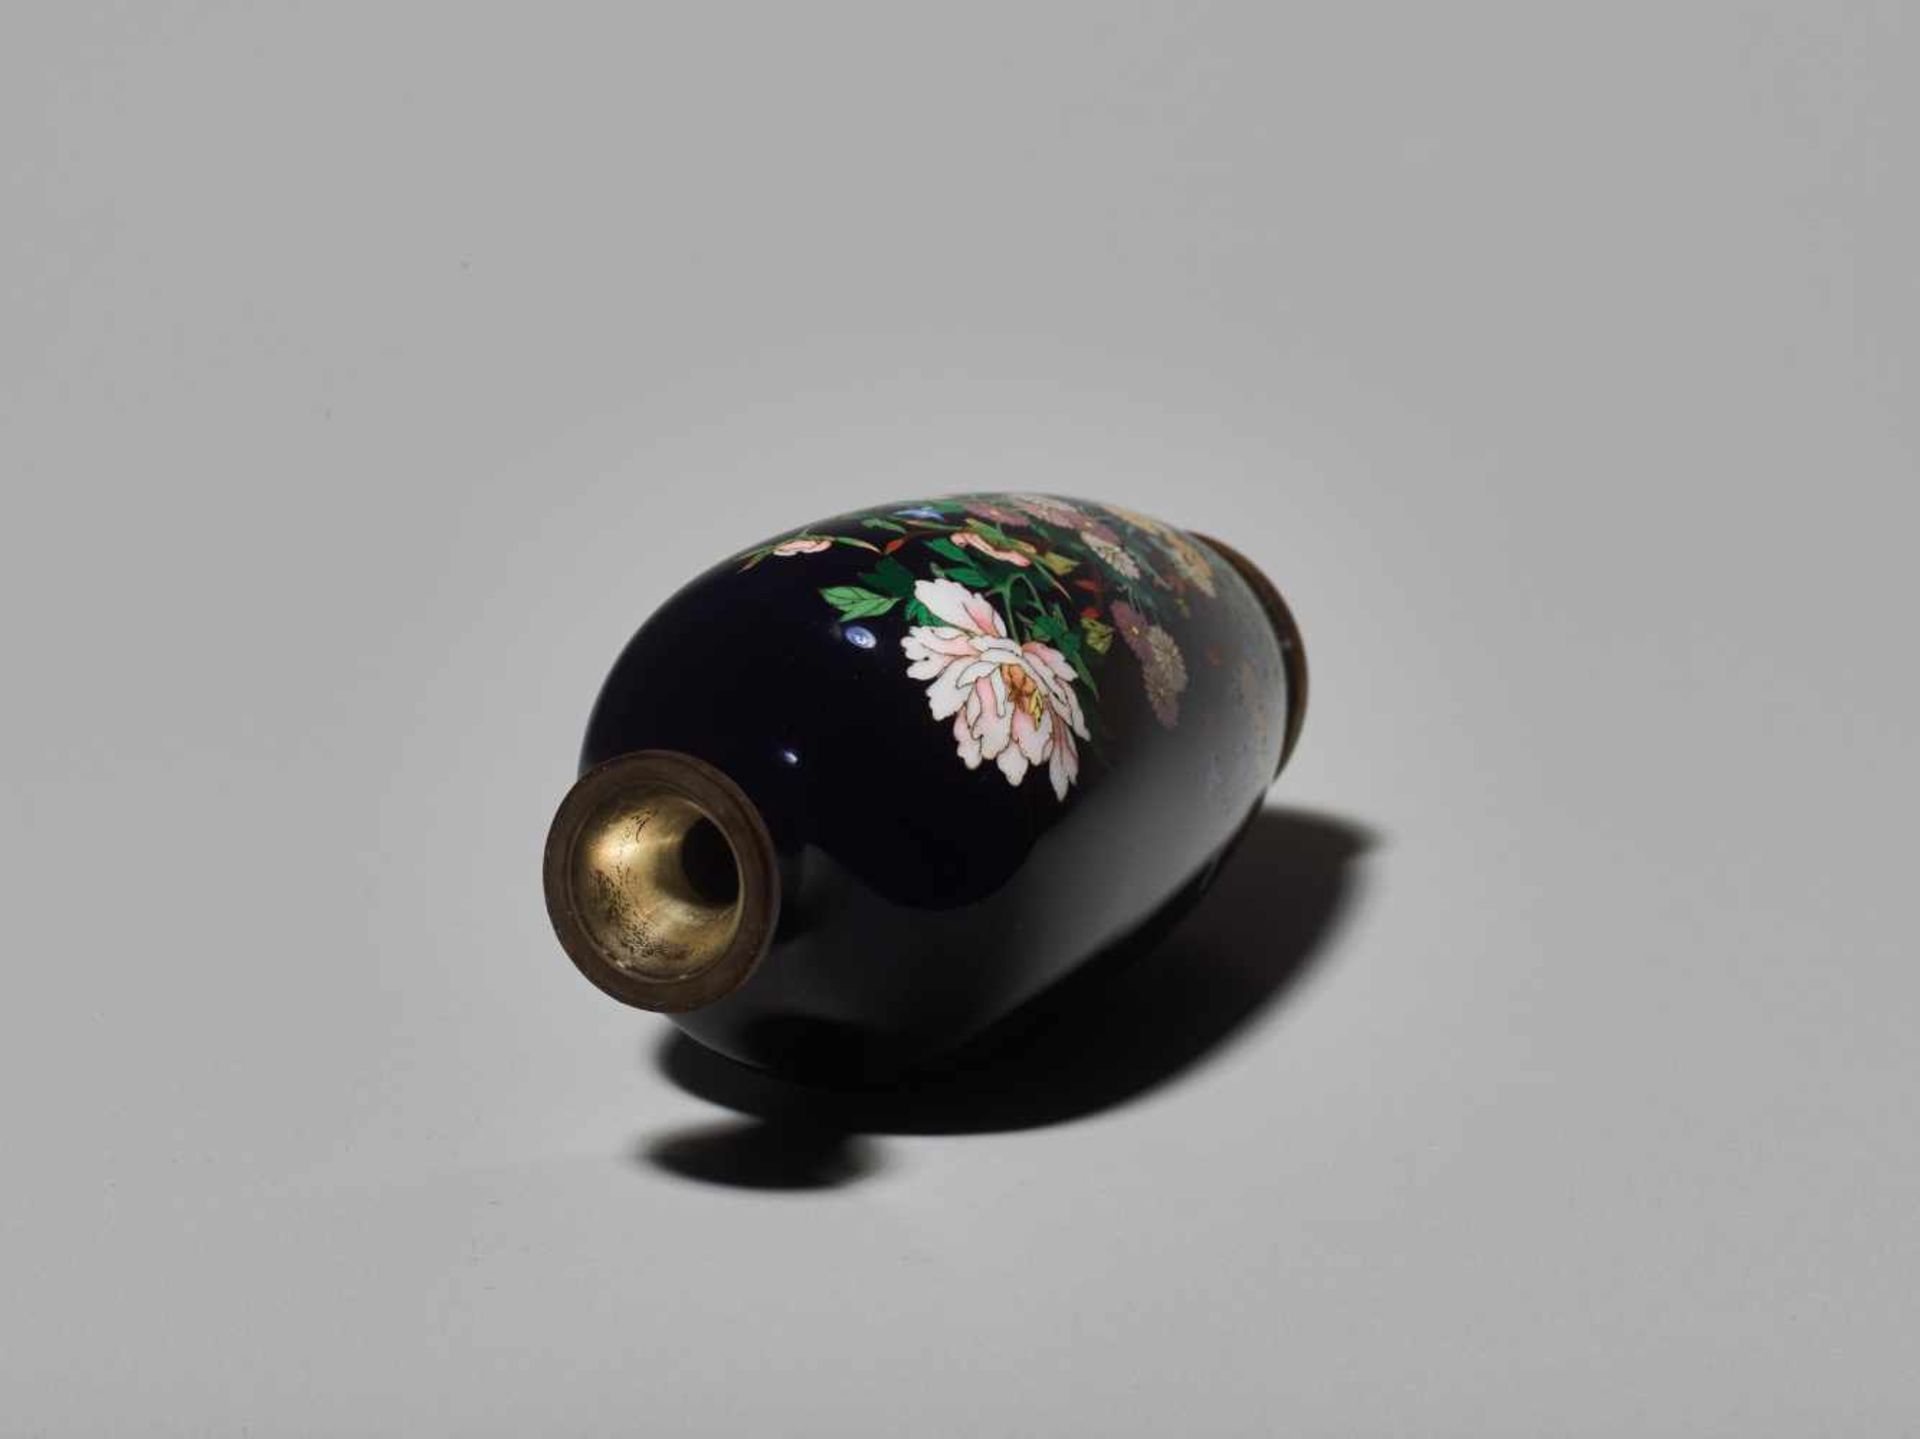 A JAPANESE CLOISONNÉ ENAMEL VASE WITH KIKU AND FUYO BLOSSOMS Cloisonné with colored enamelsJapan, - Image 4 of 6